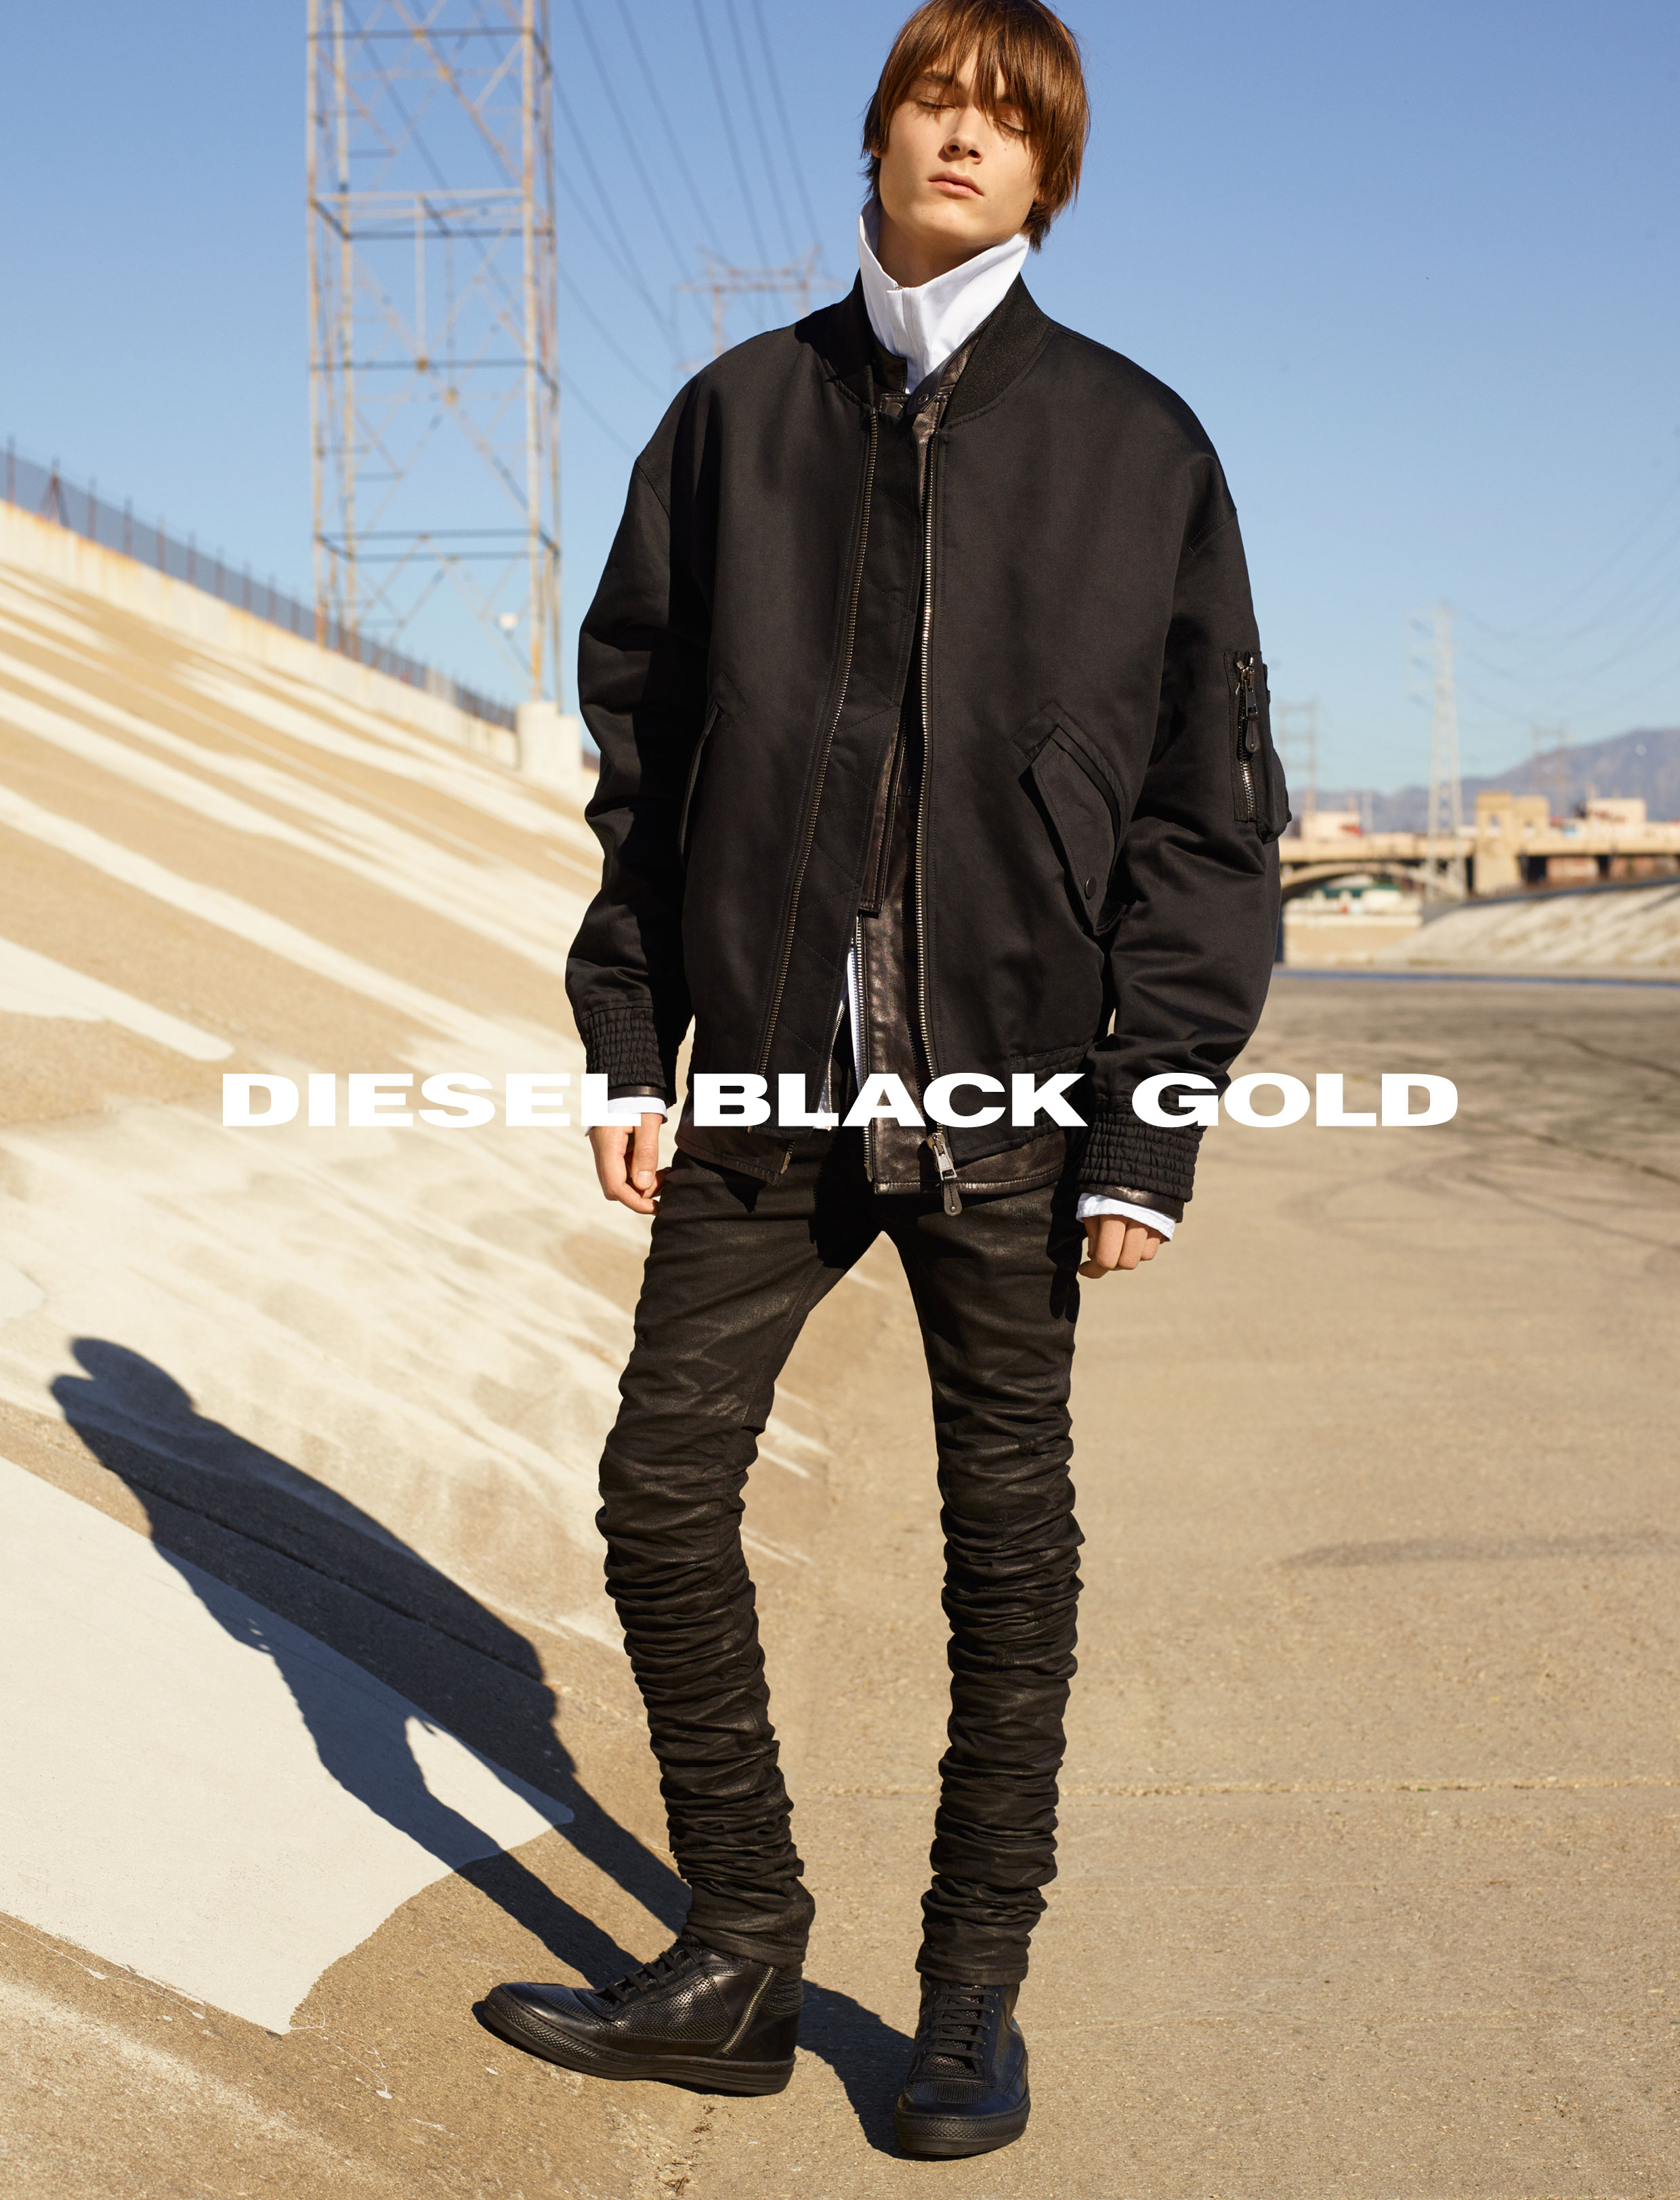 Diesel Black Gold SS16 Campaign